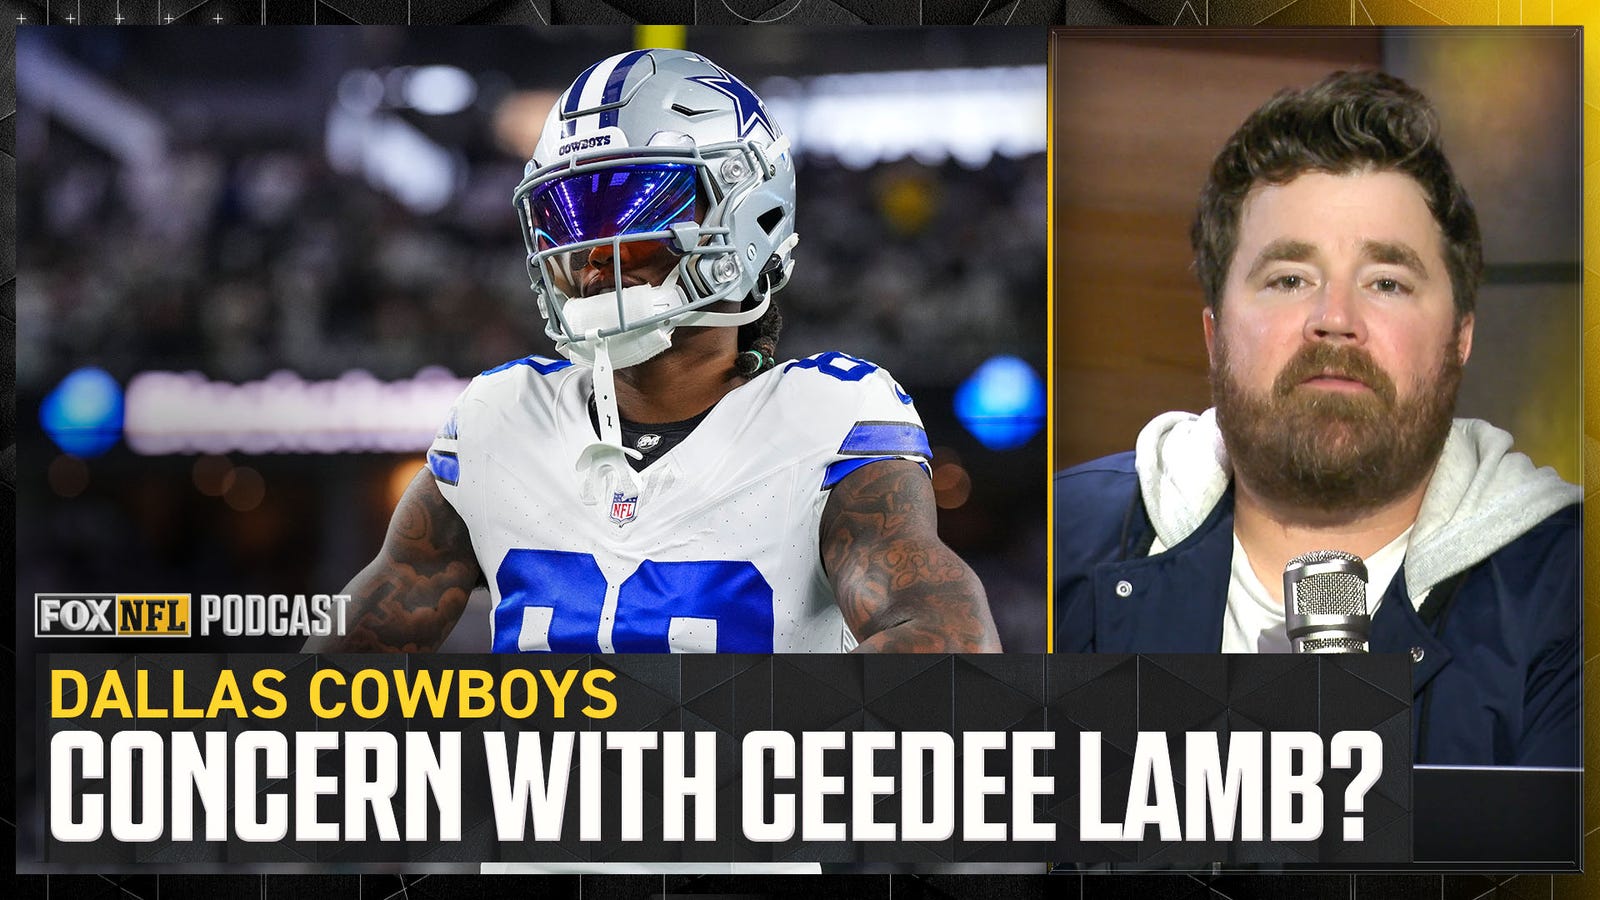 Should Cowboys be WORRIED about CeeDee Lamb?